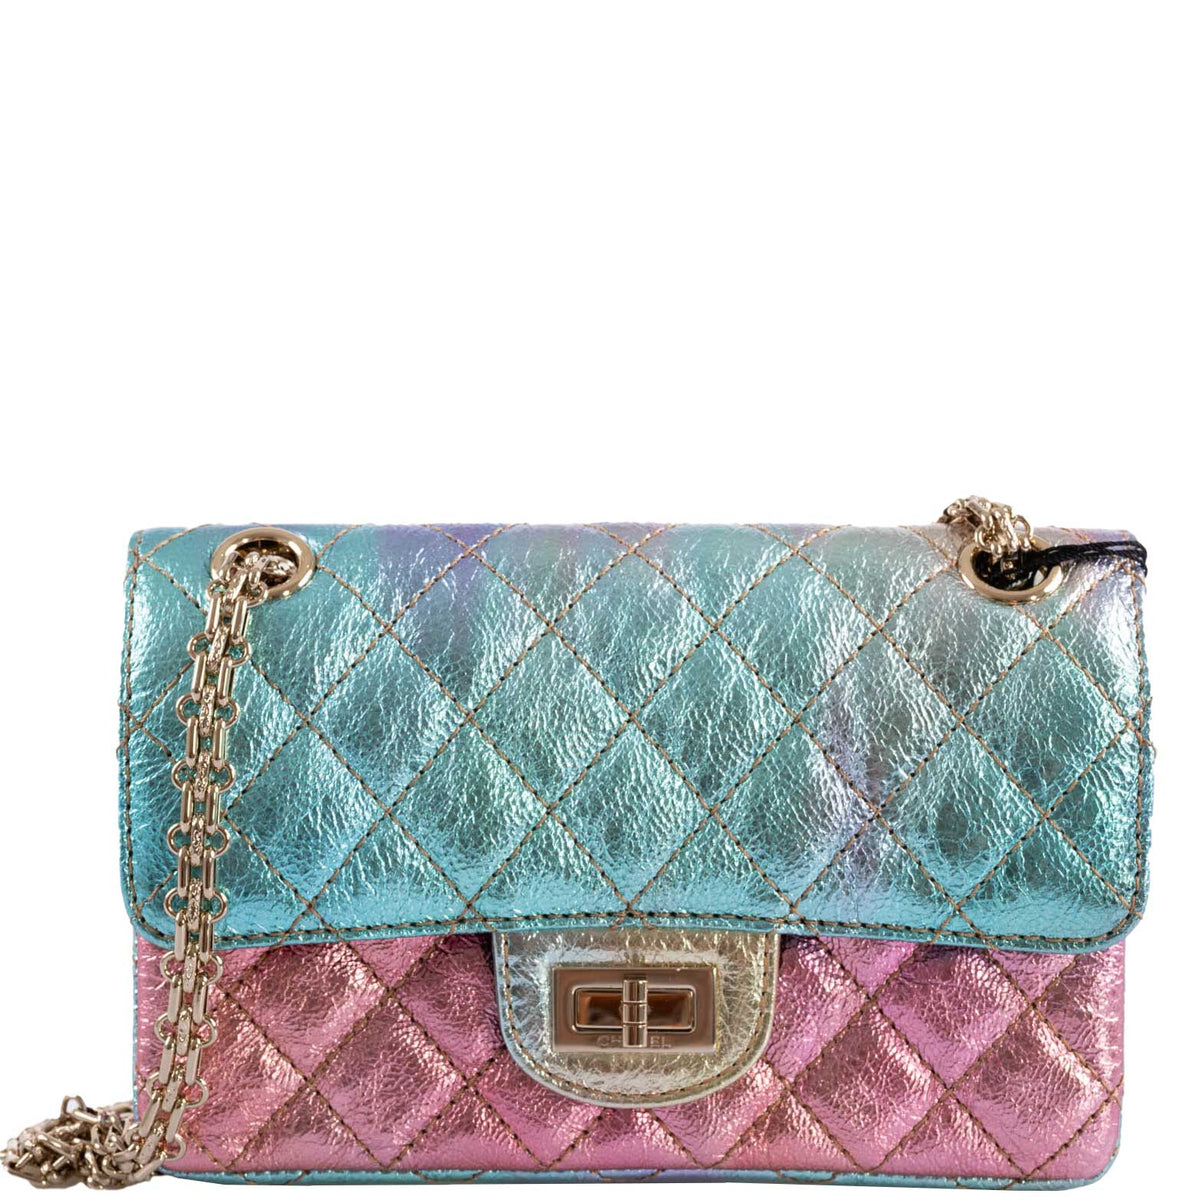 cheerful colors to brighten the day Chanel rainbow tweed mini flap